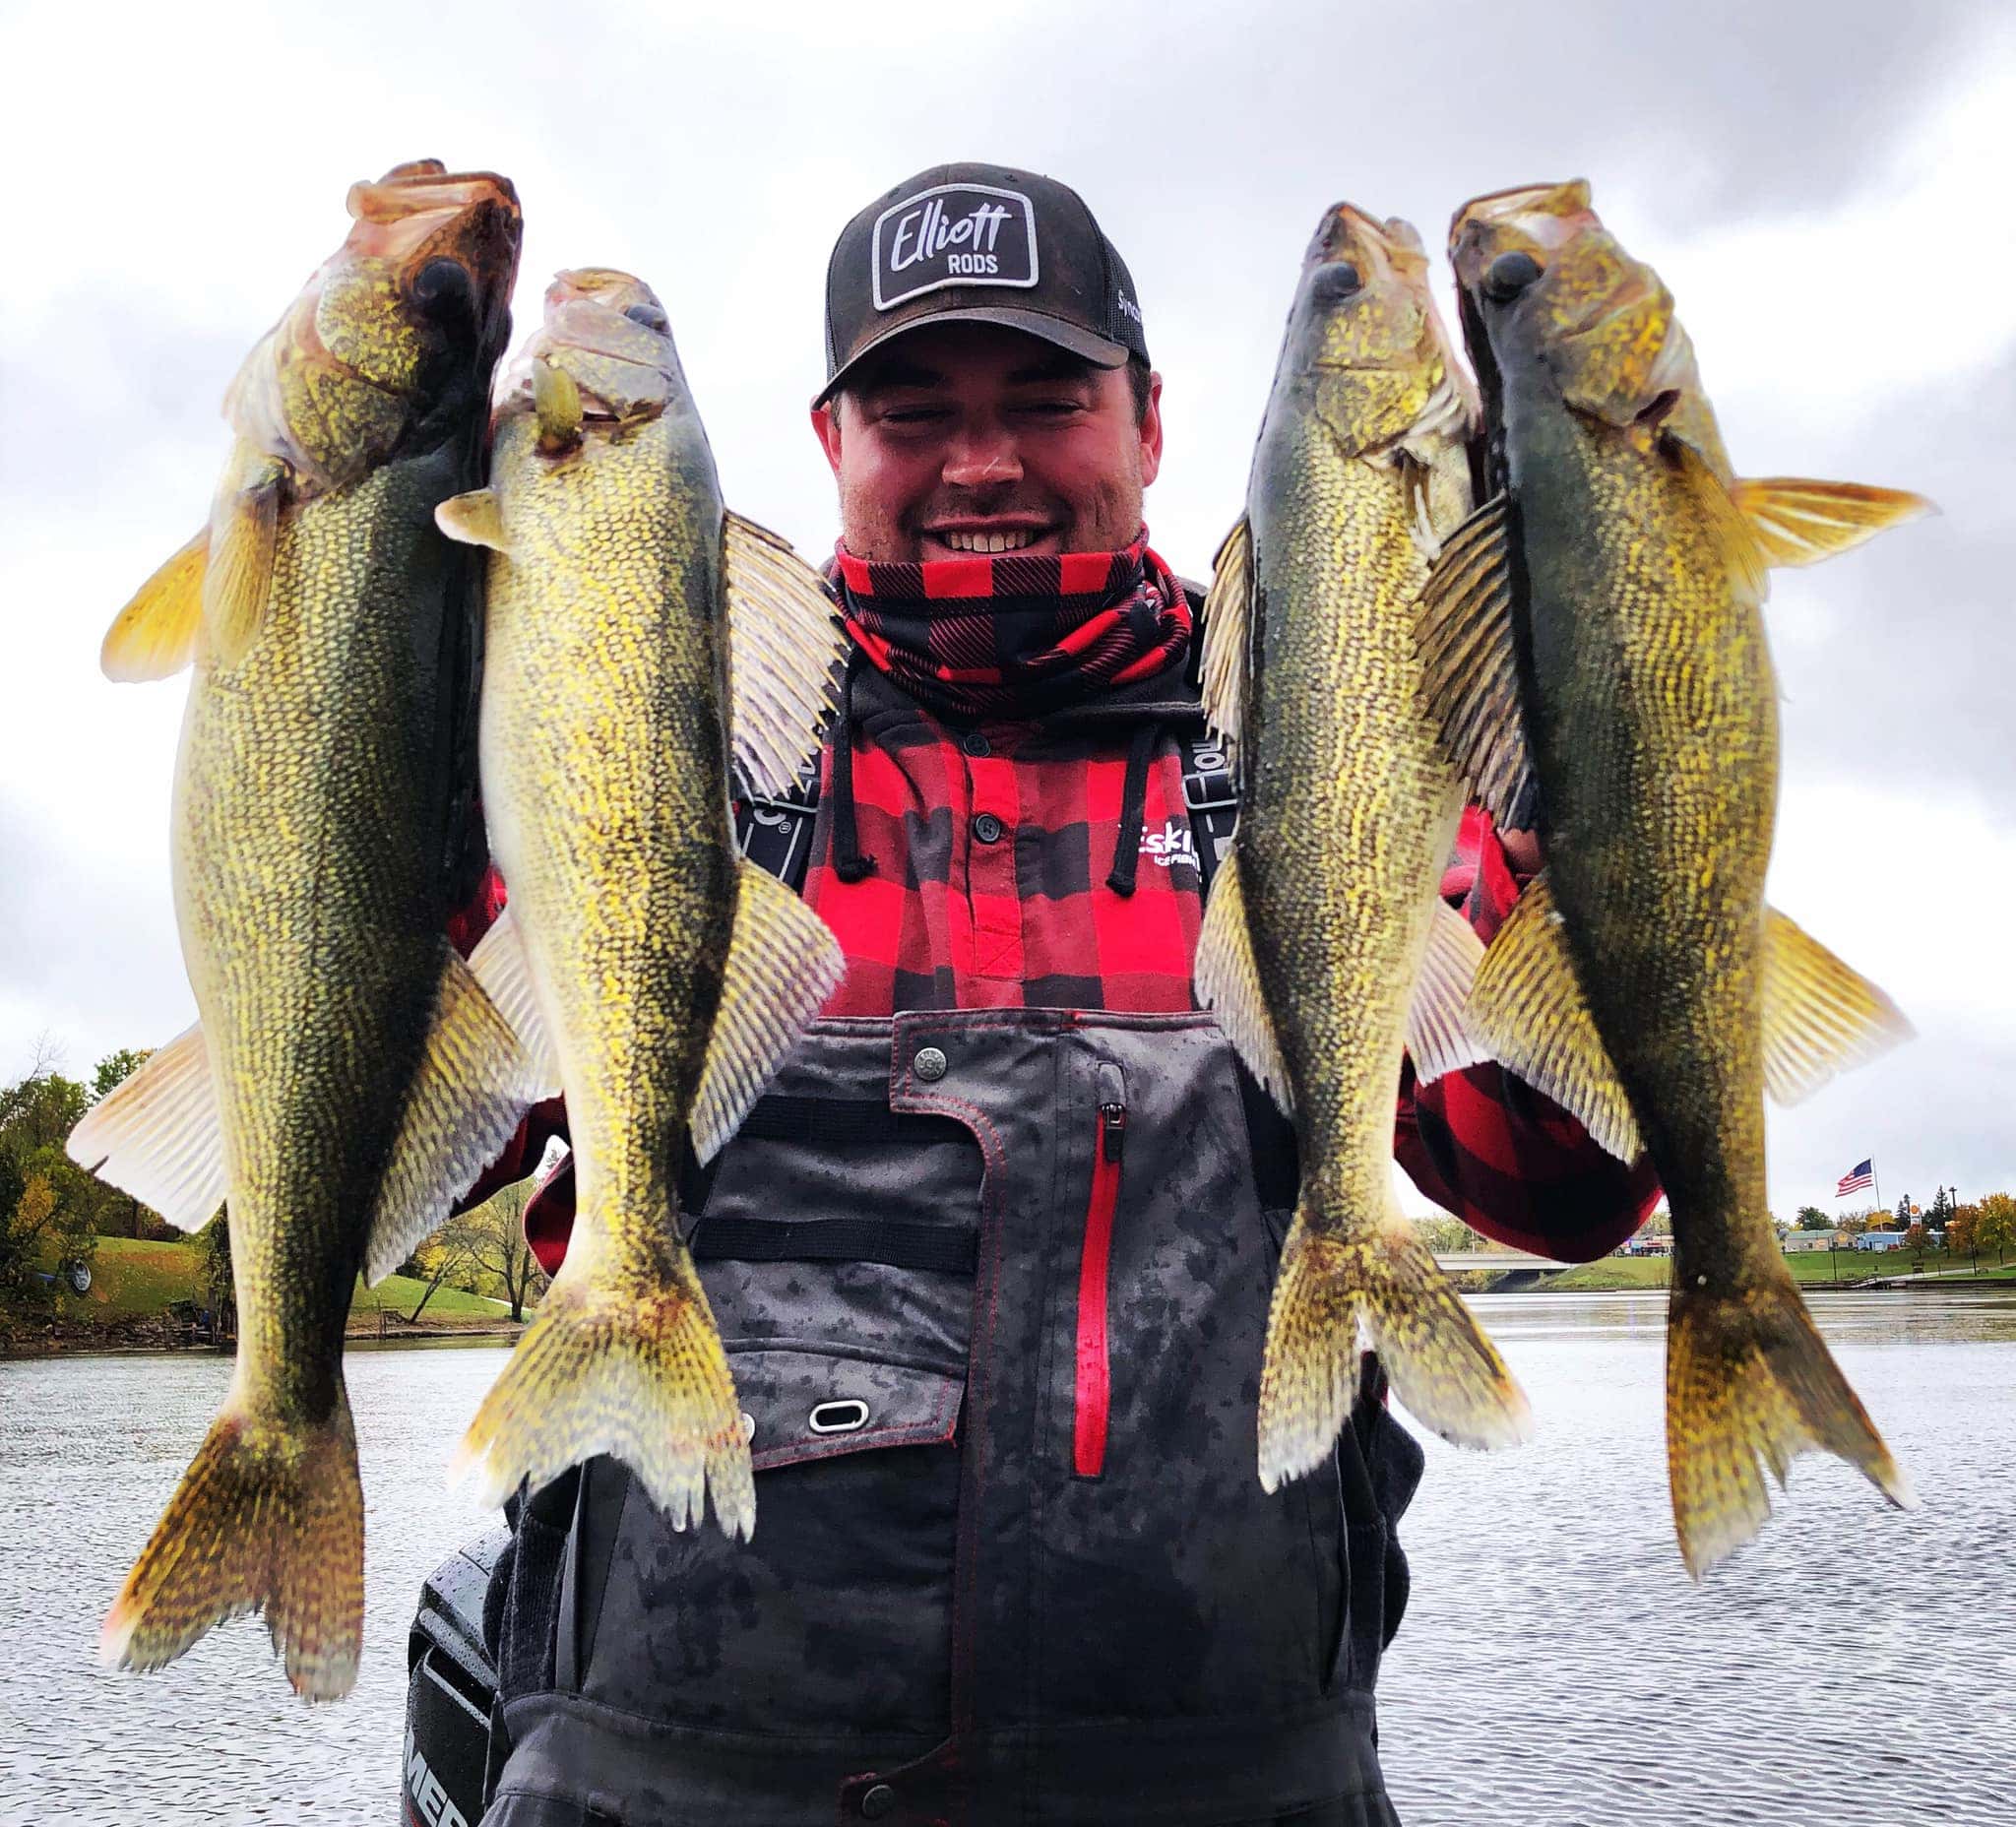 Fall The Season to Jig for Walleyes - Lake of the Woods